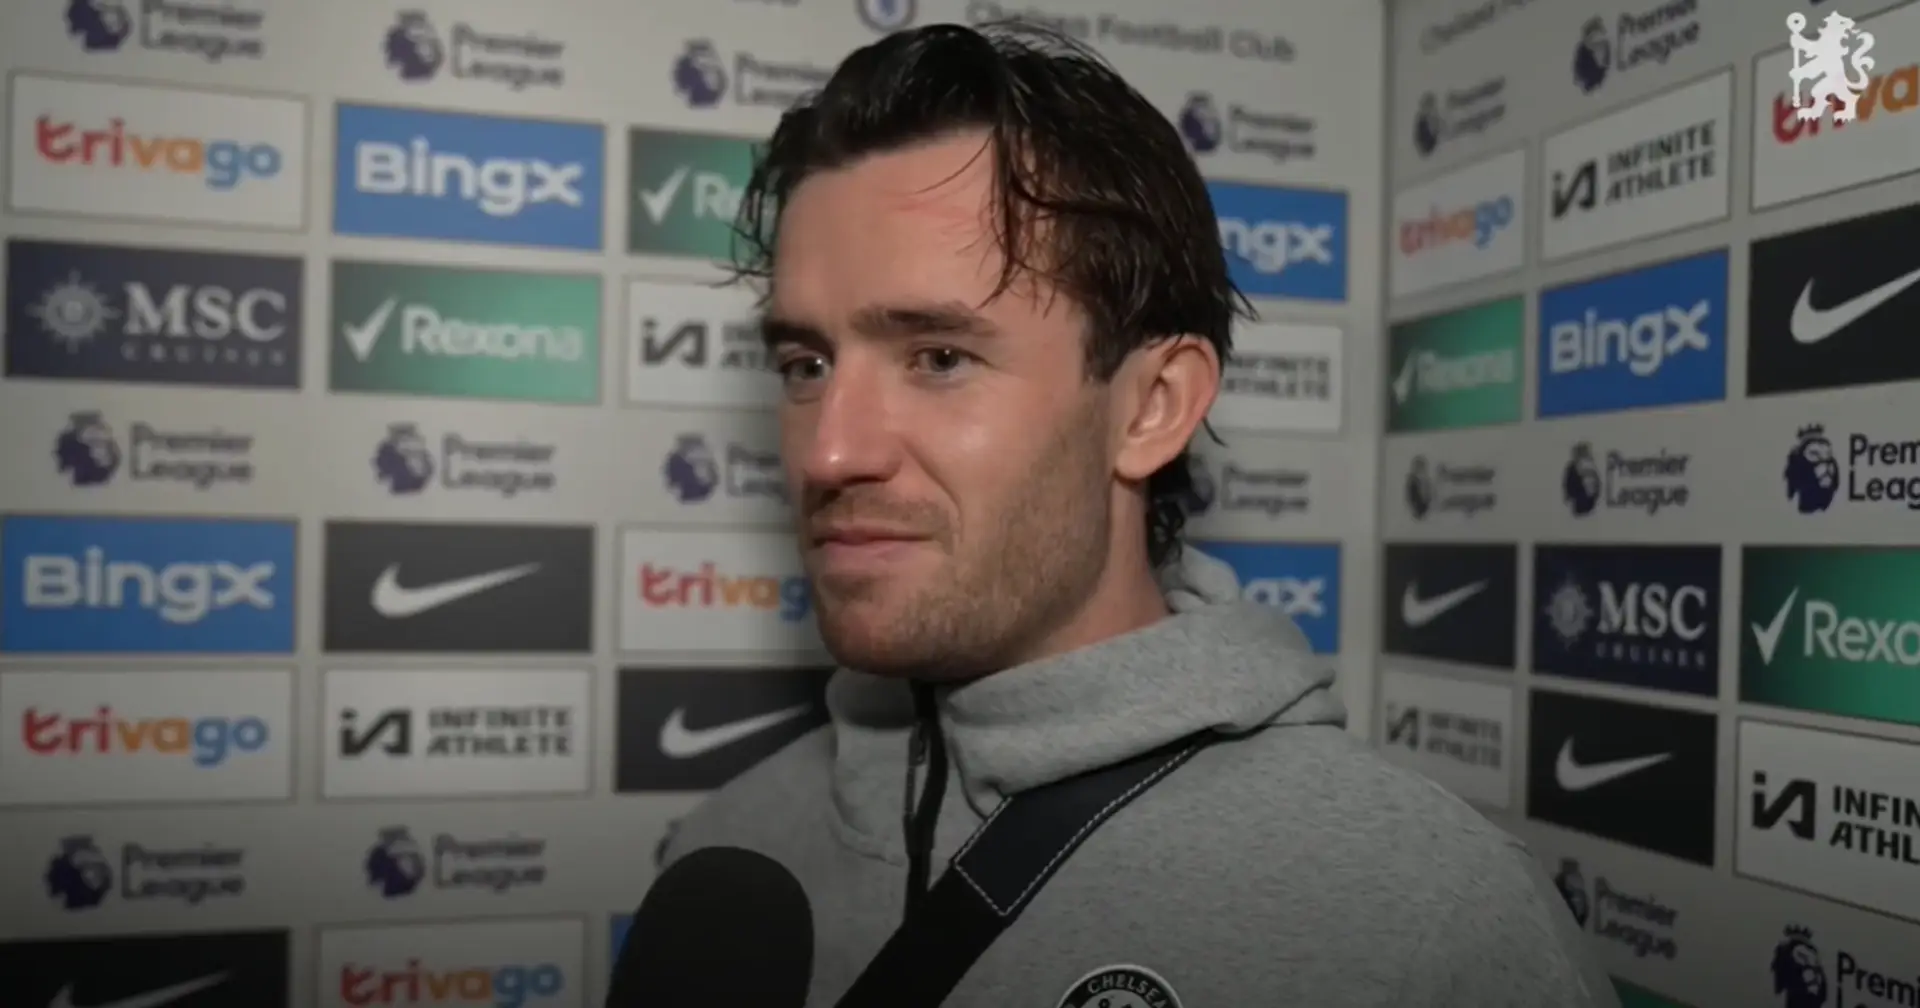 'I want to try': Ben Chilwell eager to show leadership qualities after return to Chelsea squad